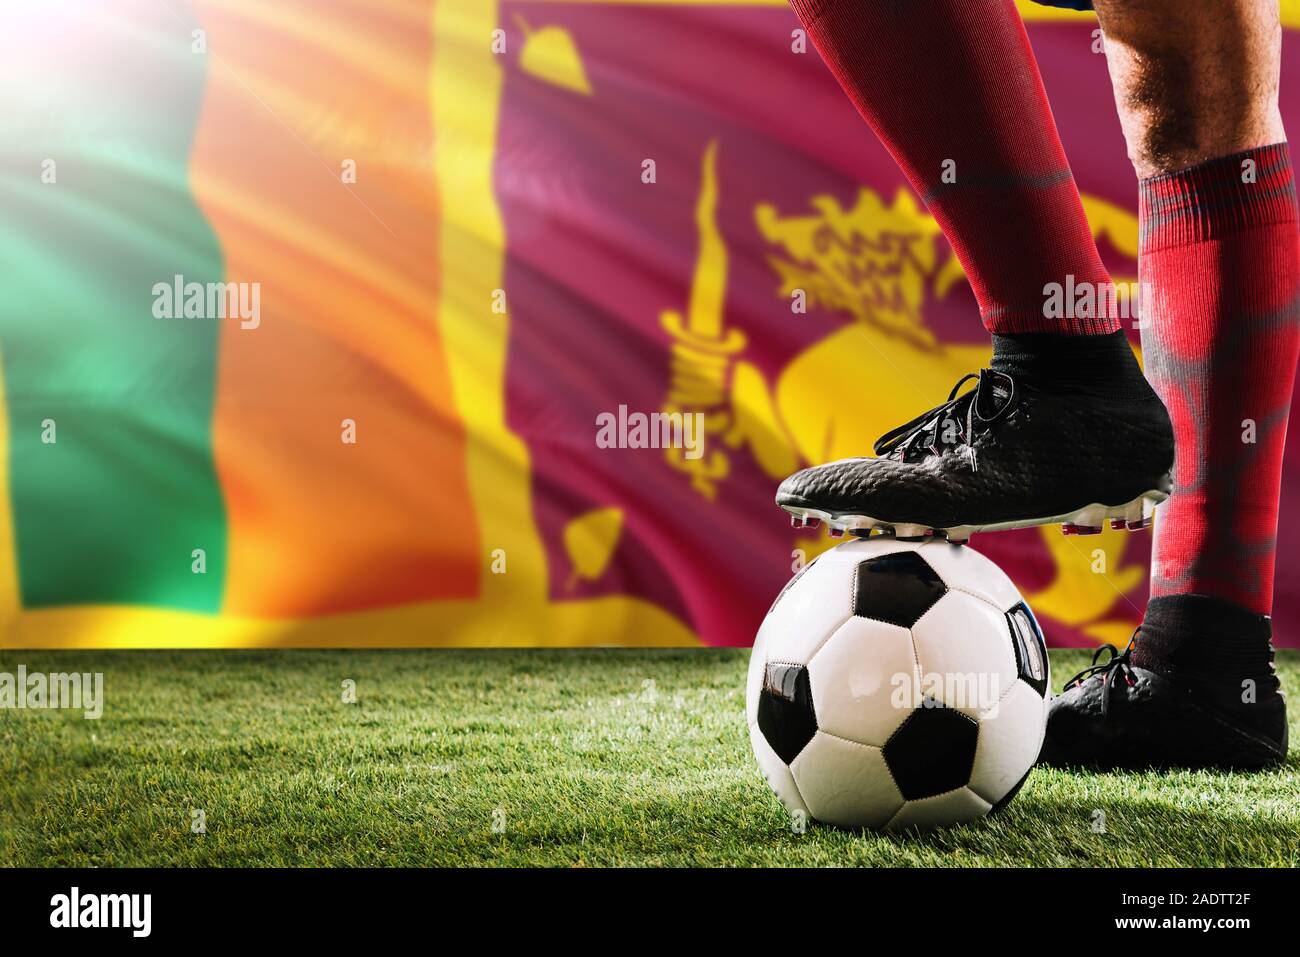 Close up legs of Sri Lanka football team player in red socks, shoes on soccer ball at the free kick or penalty spot playing on grass. Stock Photo